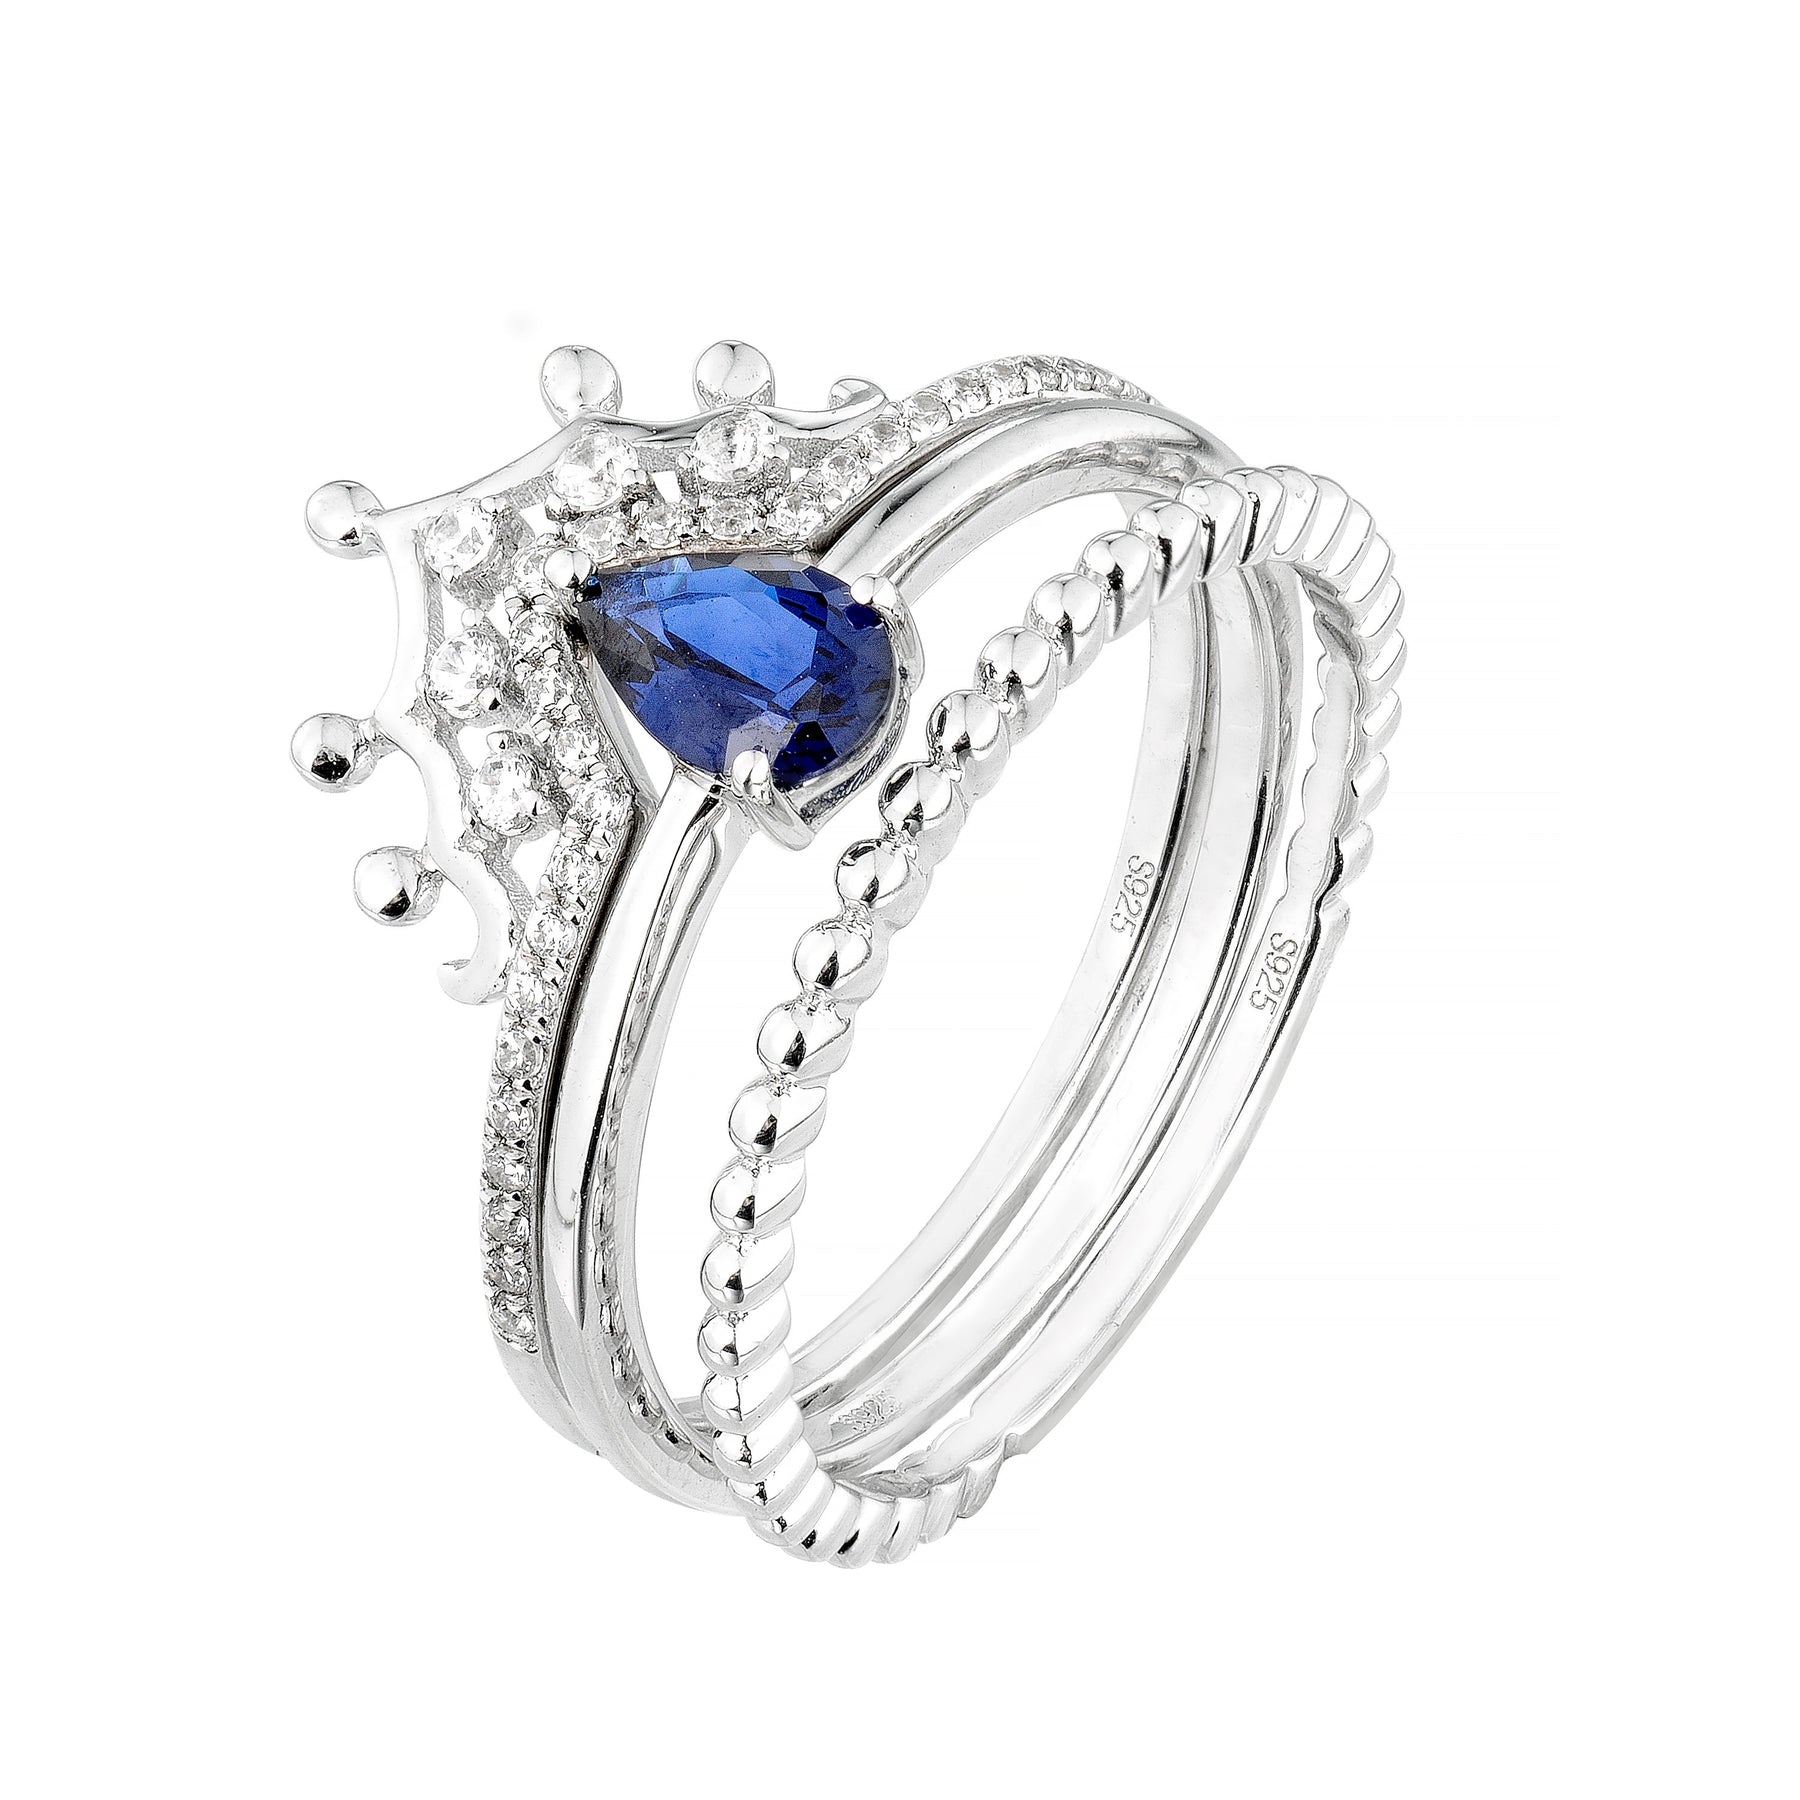 S925 Silver Crown Shape Ring